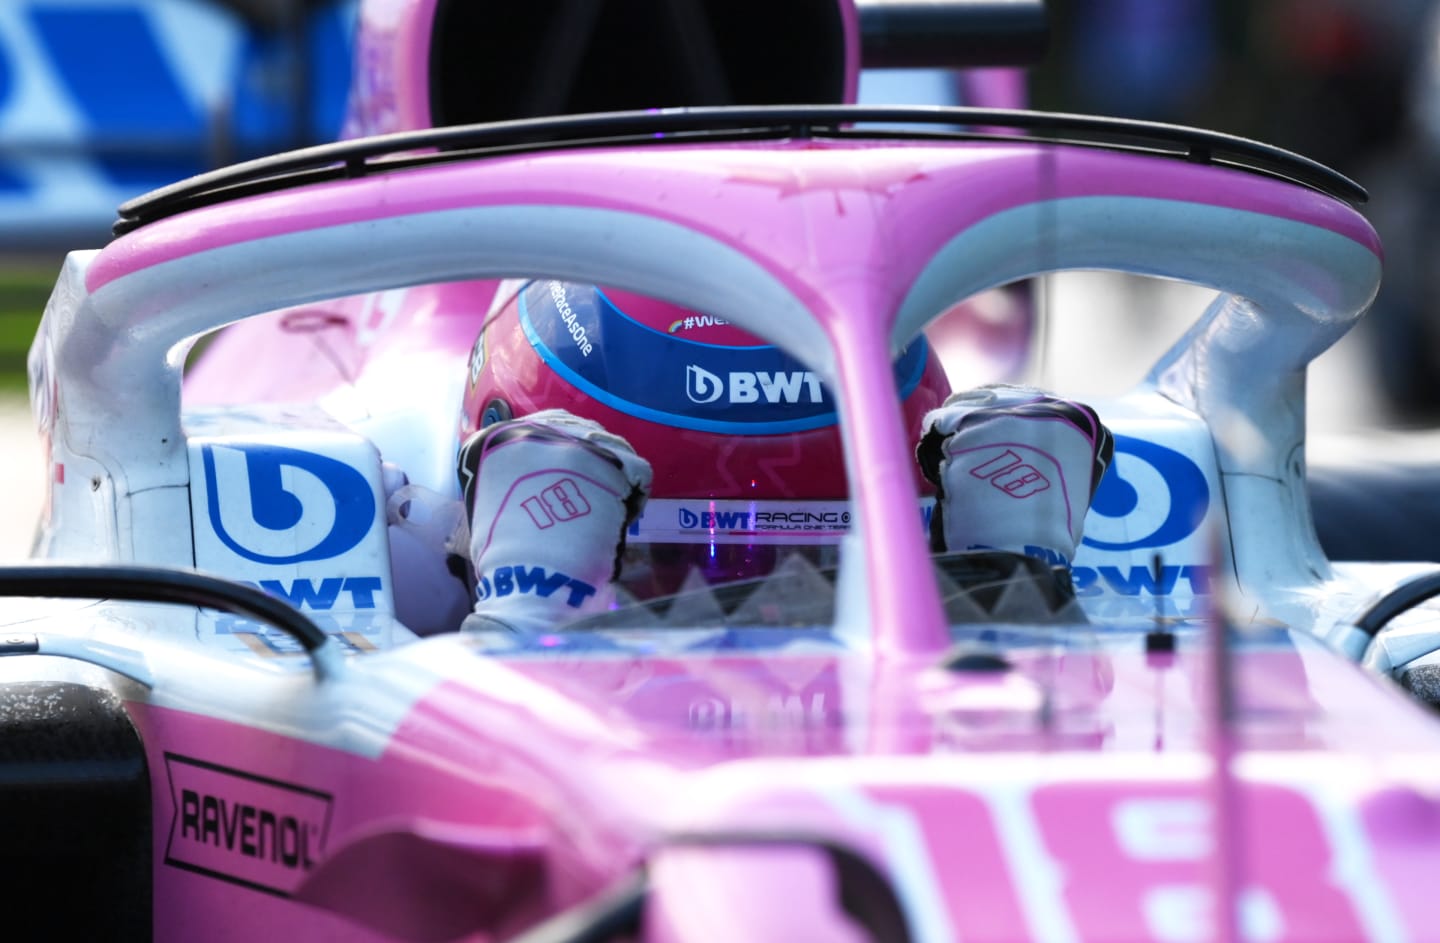 ISTANBUL, TURKEY - NOVEMBER 14: Pole position qualifier Lance Stroll of Canada and Racing Point celebrates in his car in parc ferme during qualifying ahead of the F1 Grand Prix of Turkey at Intercity Istanbul Park on November 14, 2020 in Istanbul, Turkey. (Photo by Clive Mason/Getty Images)